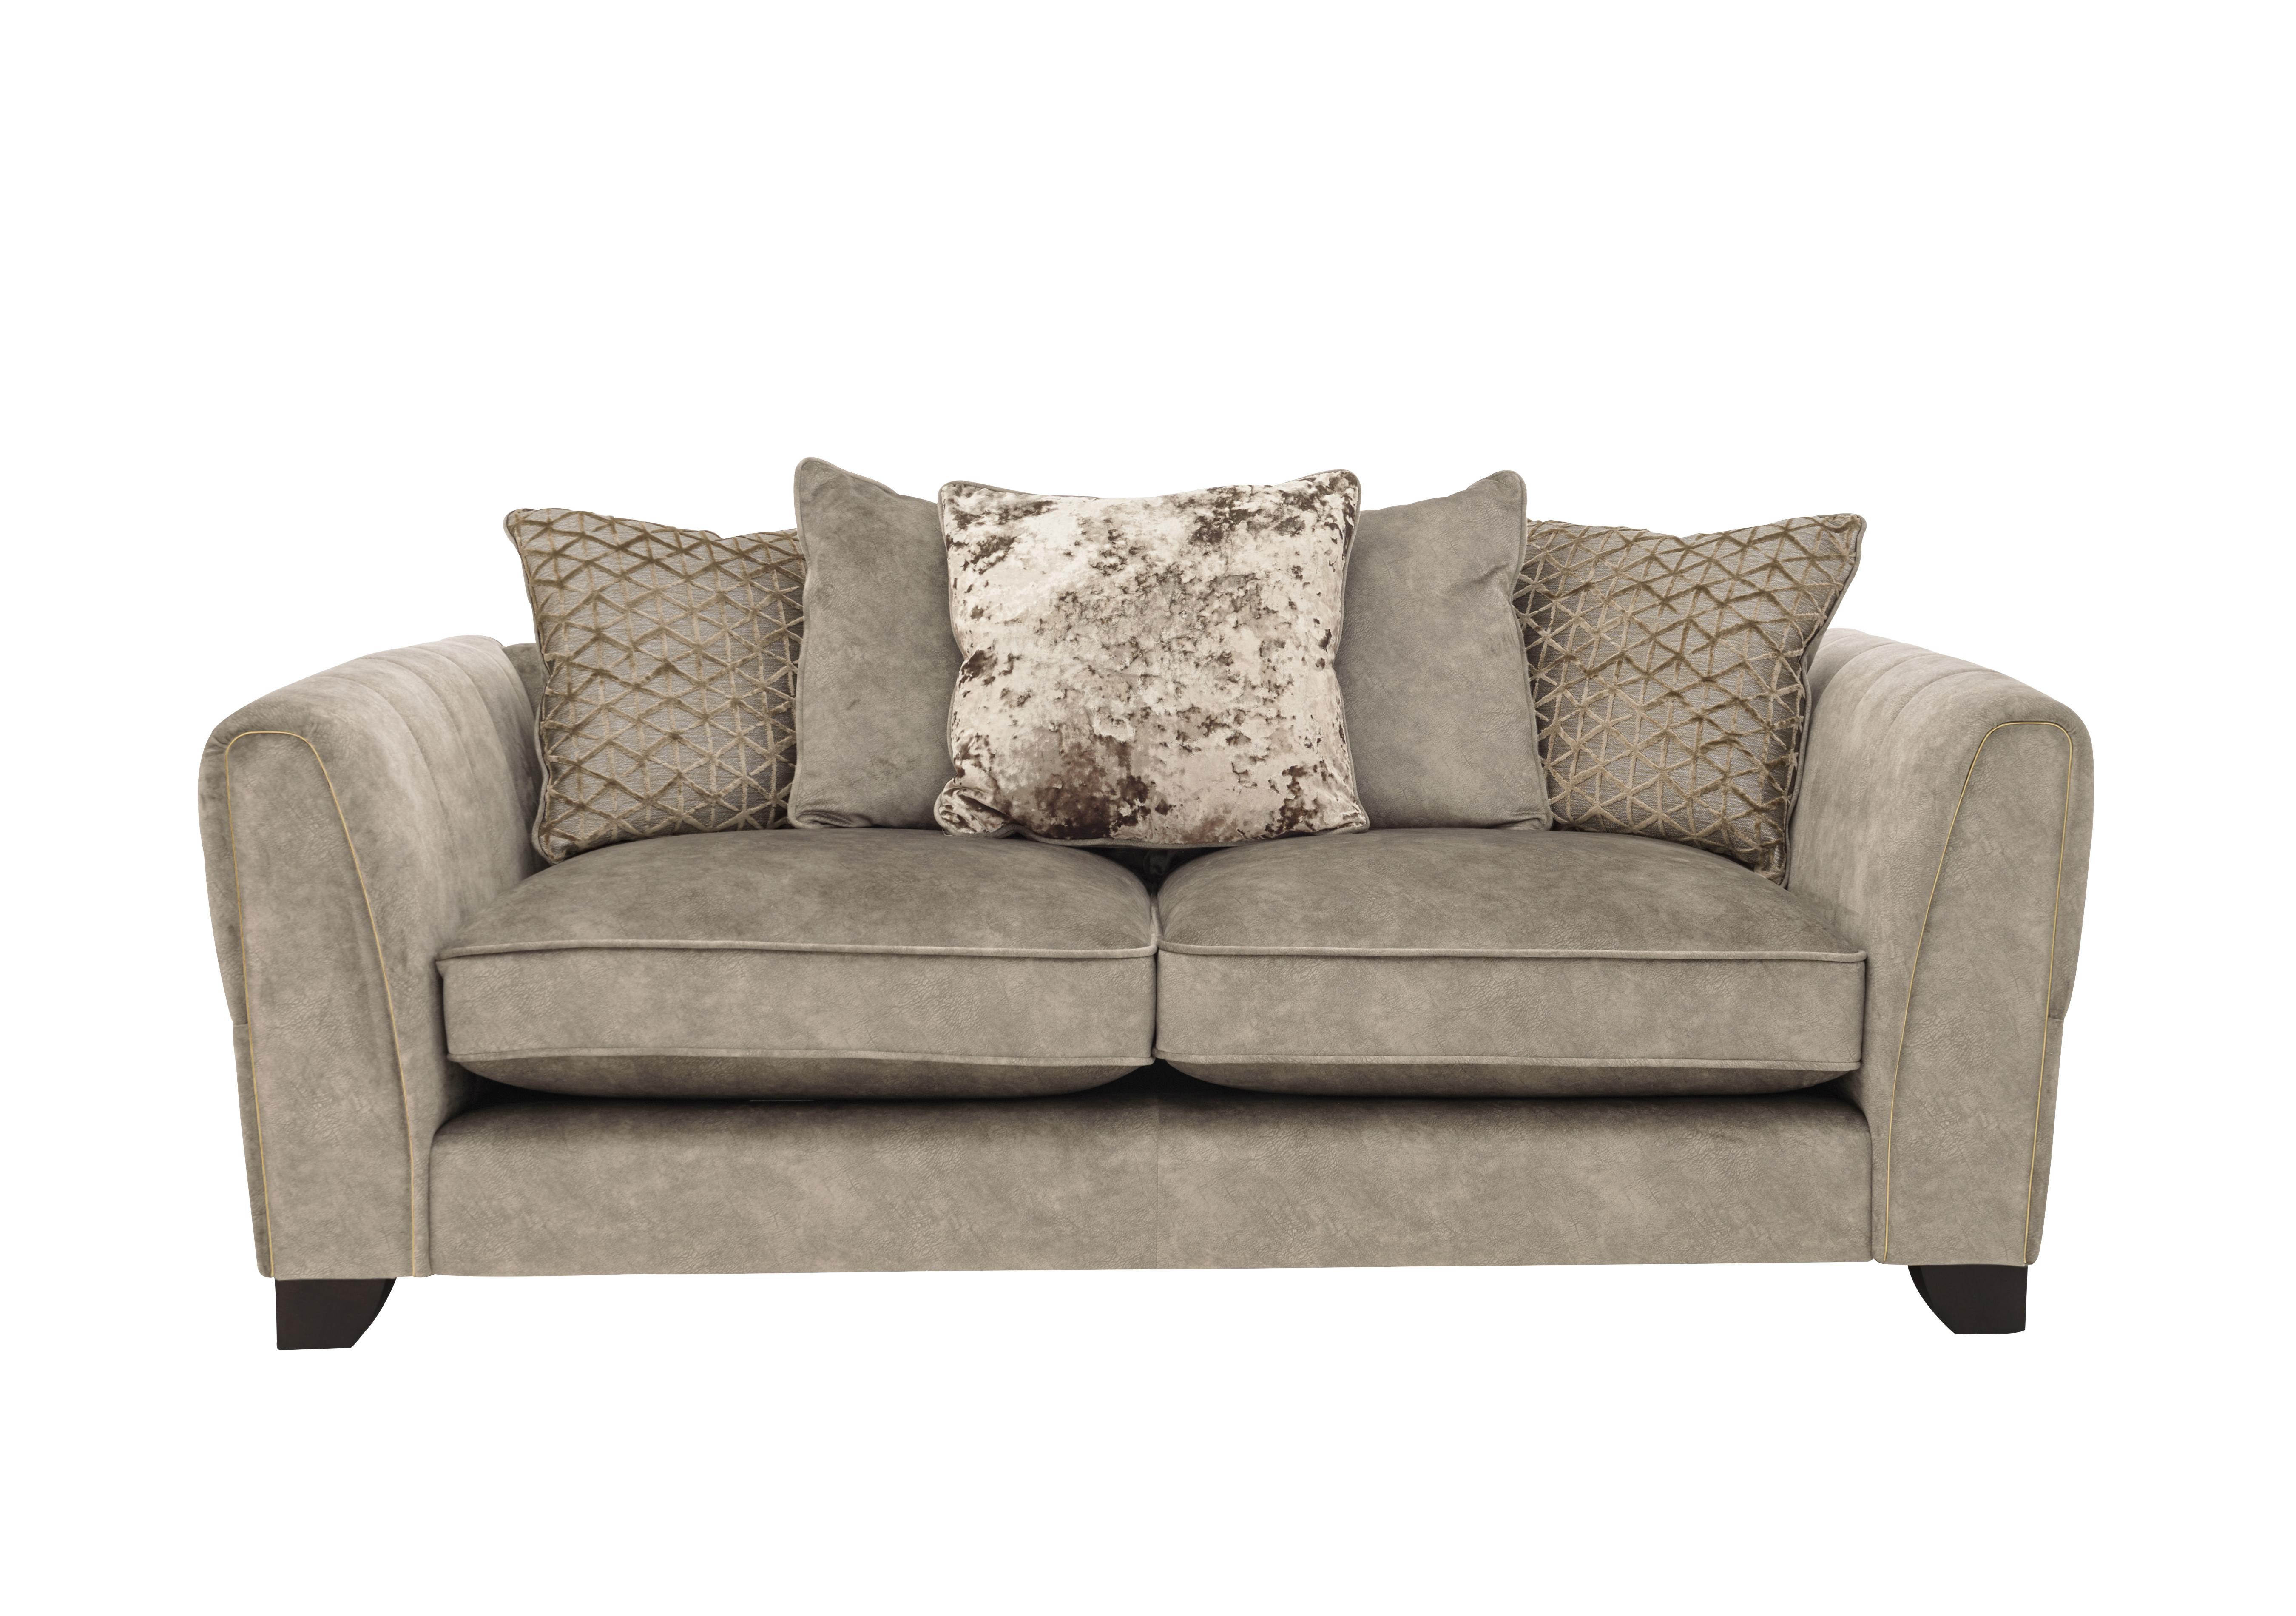 Ariana 3 Seater Fabric Pillow Back Sofa in Dapple Oyster Brass Insert on Furniture Village